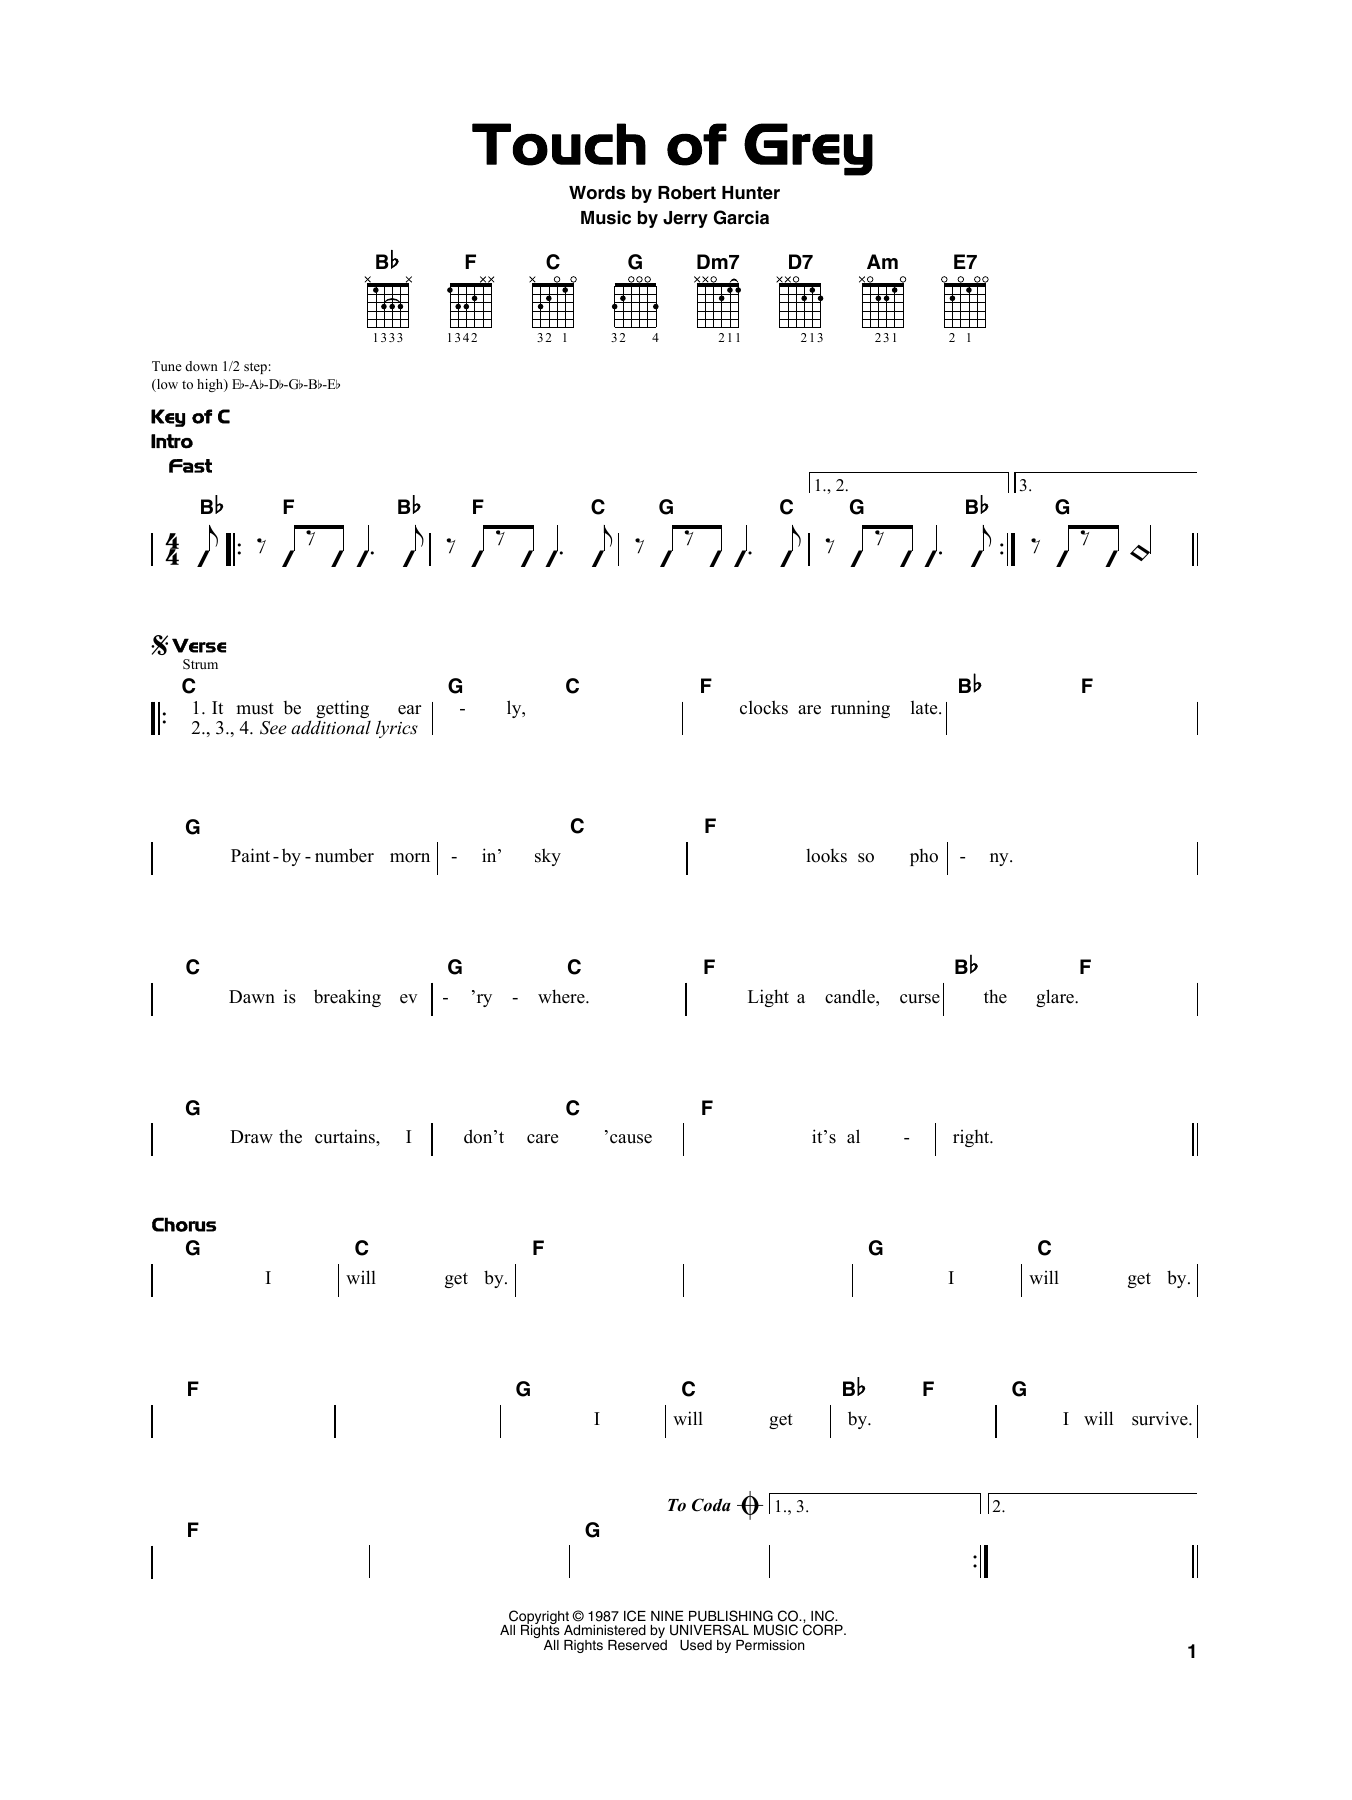 Download Grateful Dead Touch Of Grey Sheet Music